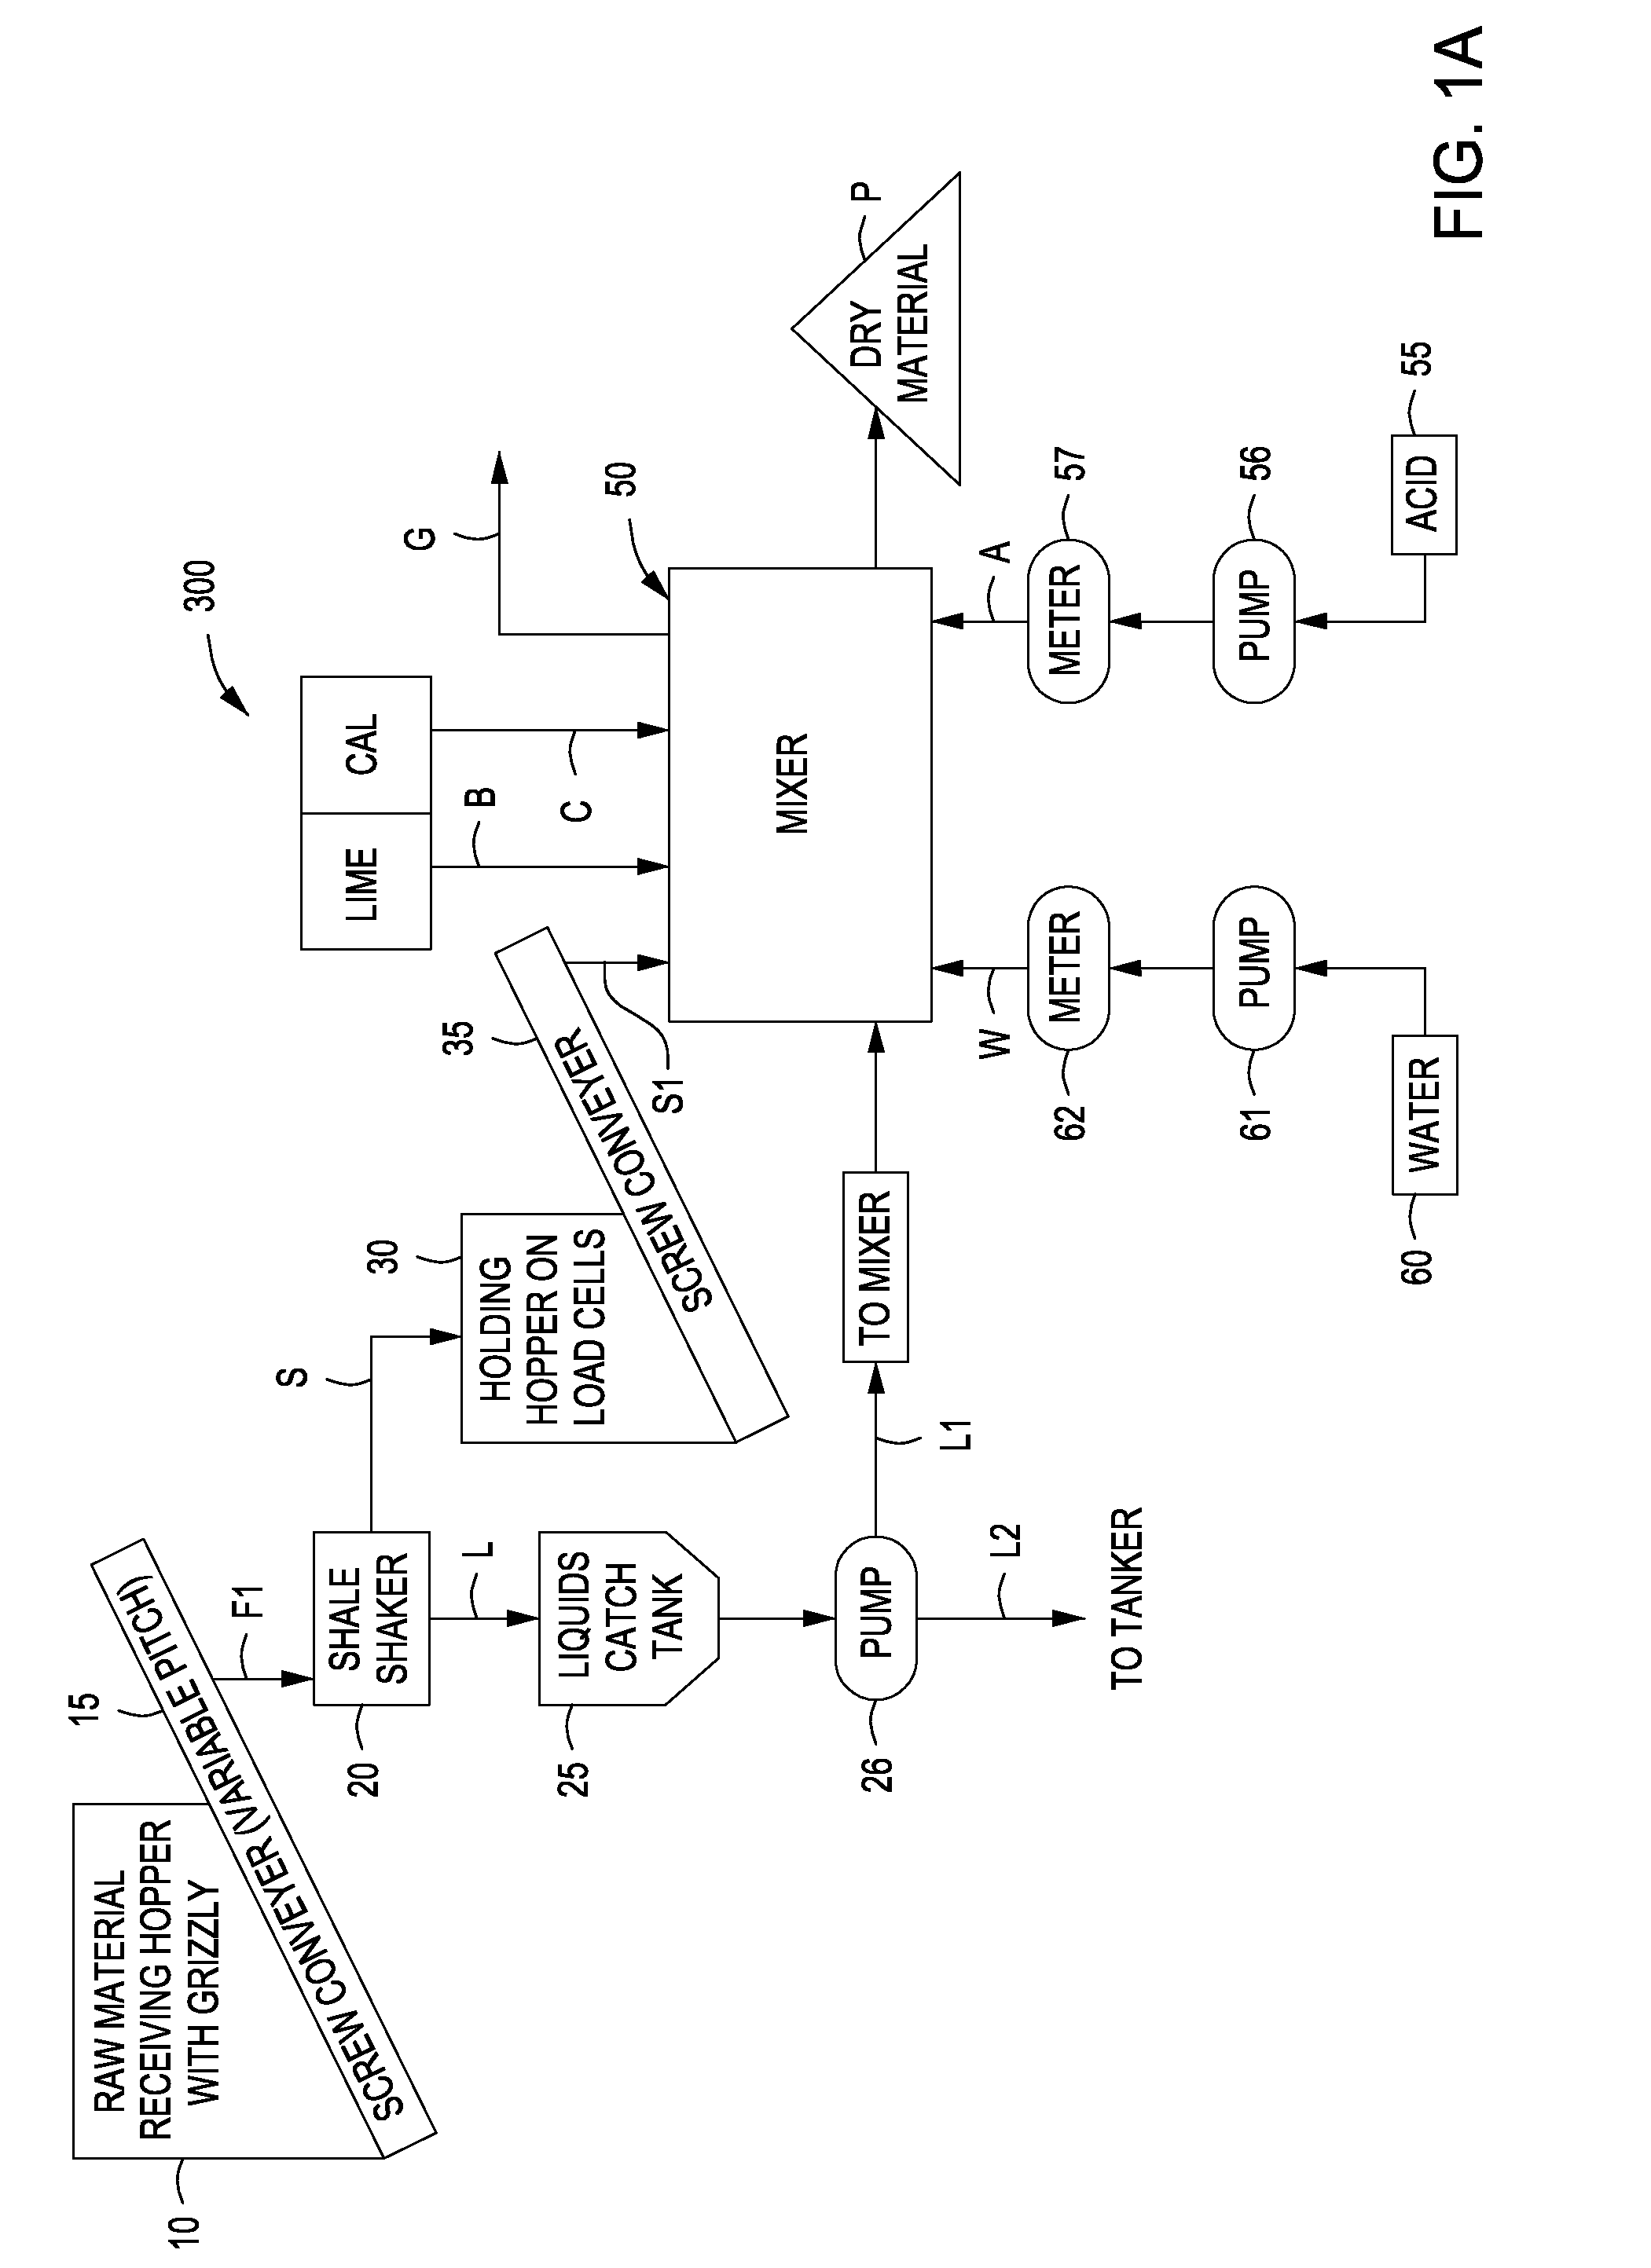 System and method for treating a contaminated substrate